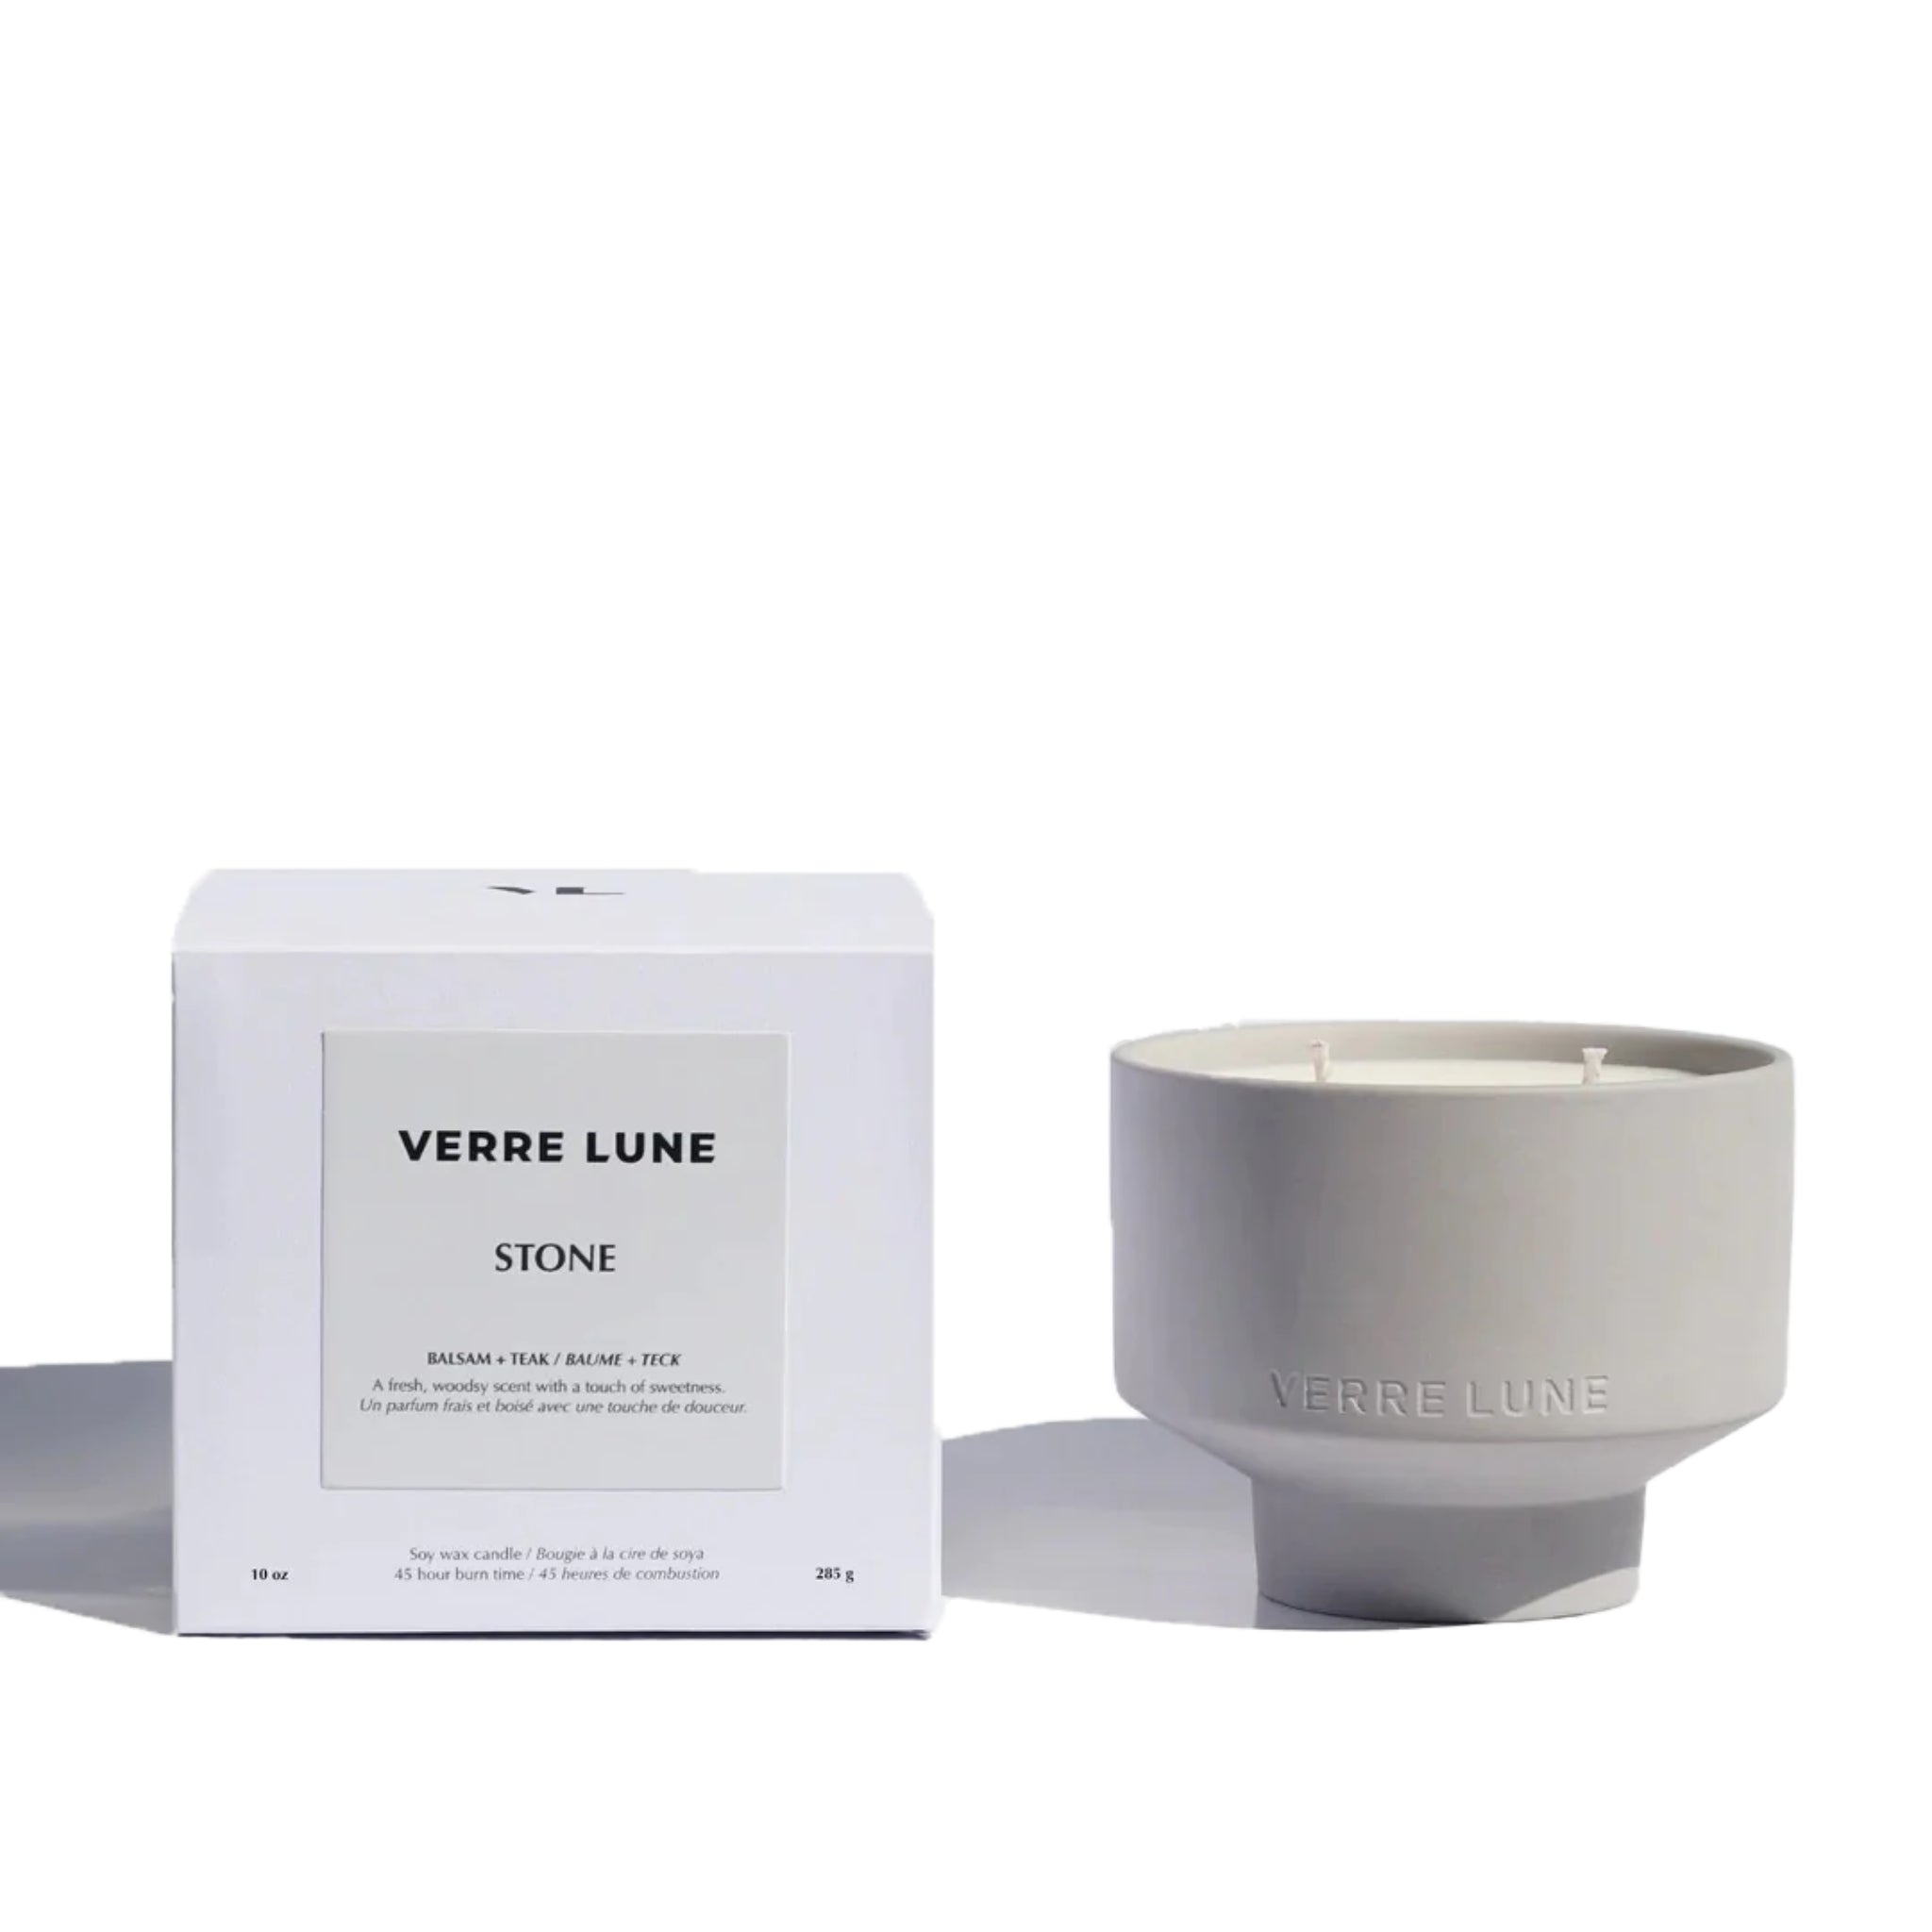 Verre Lune candle called stone (right) with its packaging (left) on a white background.